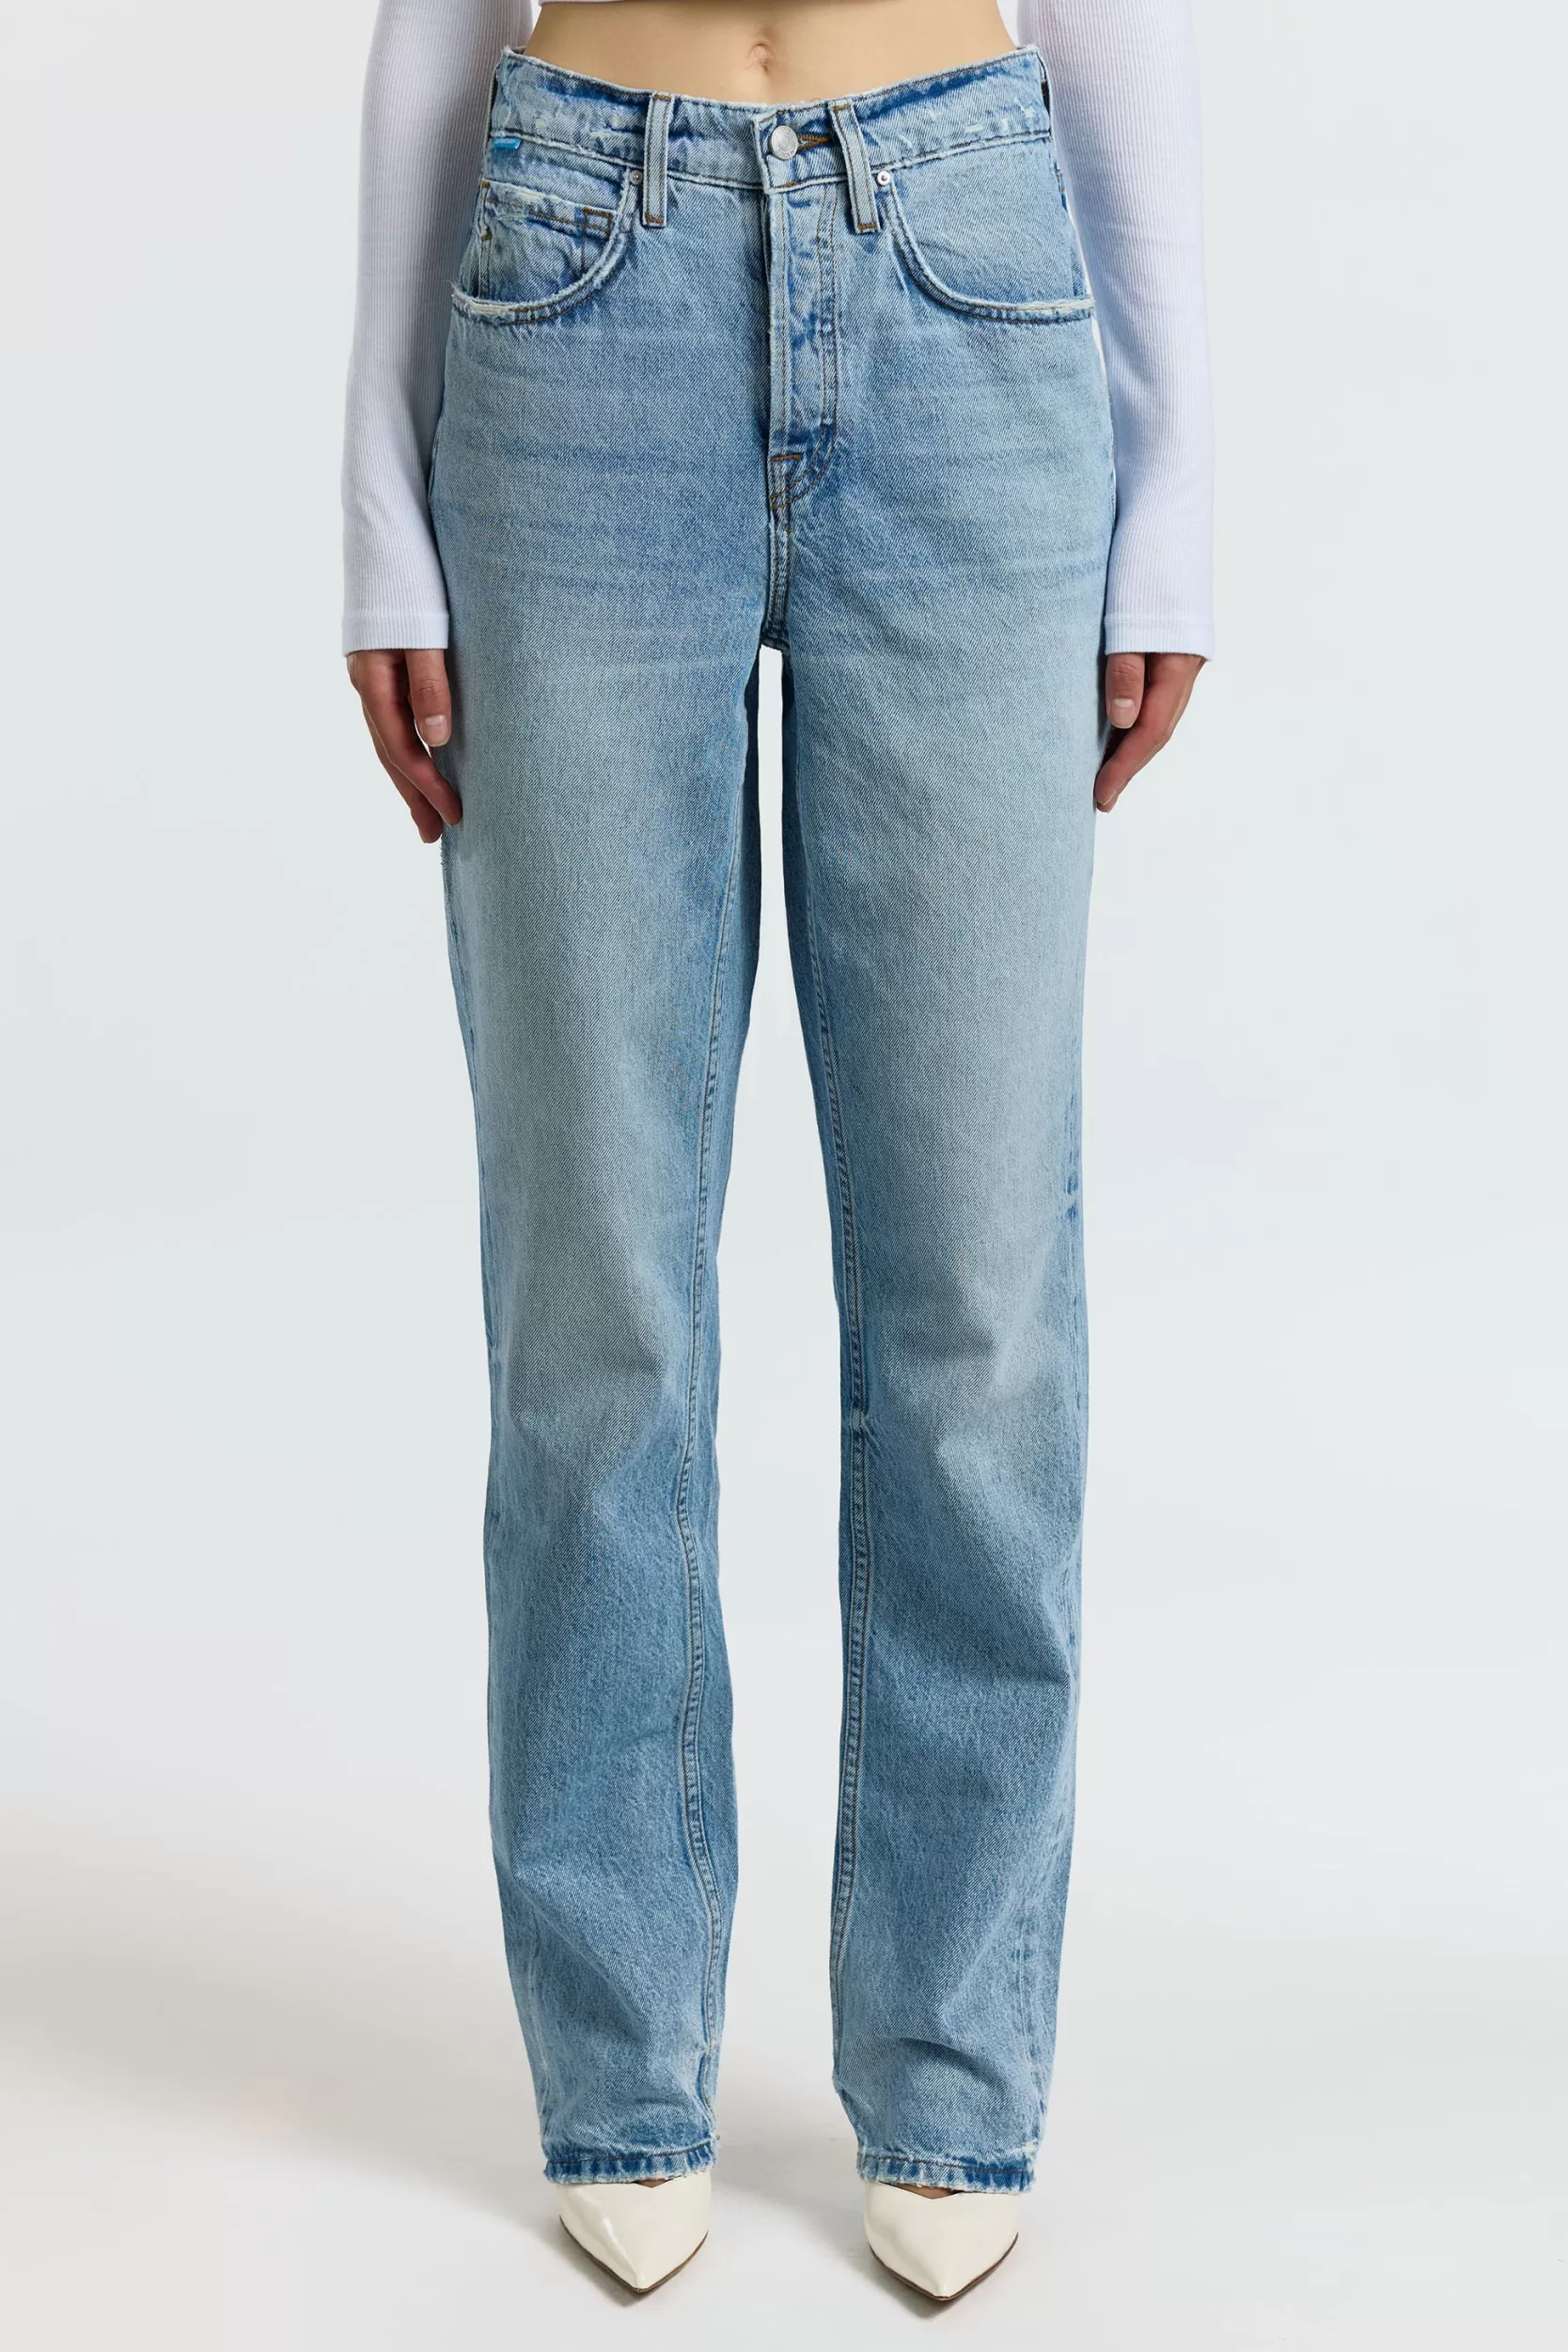 COTTONCITIZEN Kate Jean^Women THE OVERSHIRT | RELAXED